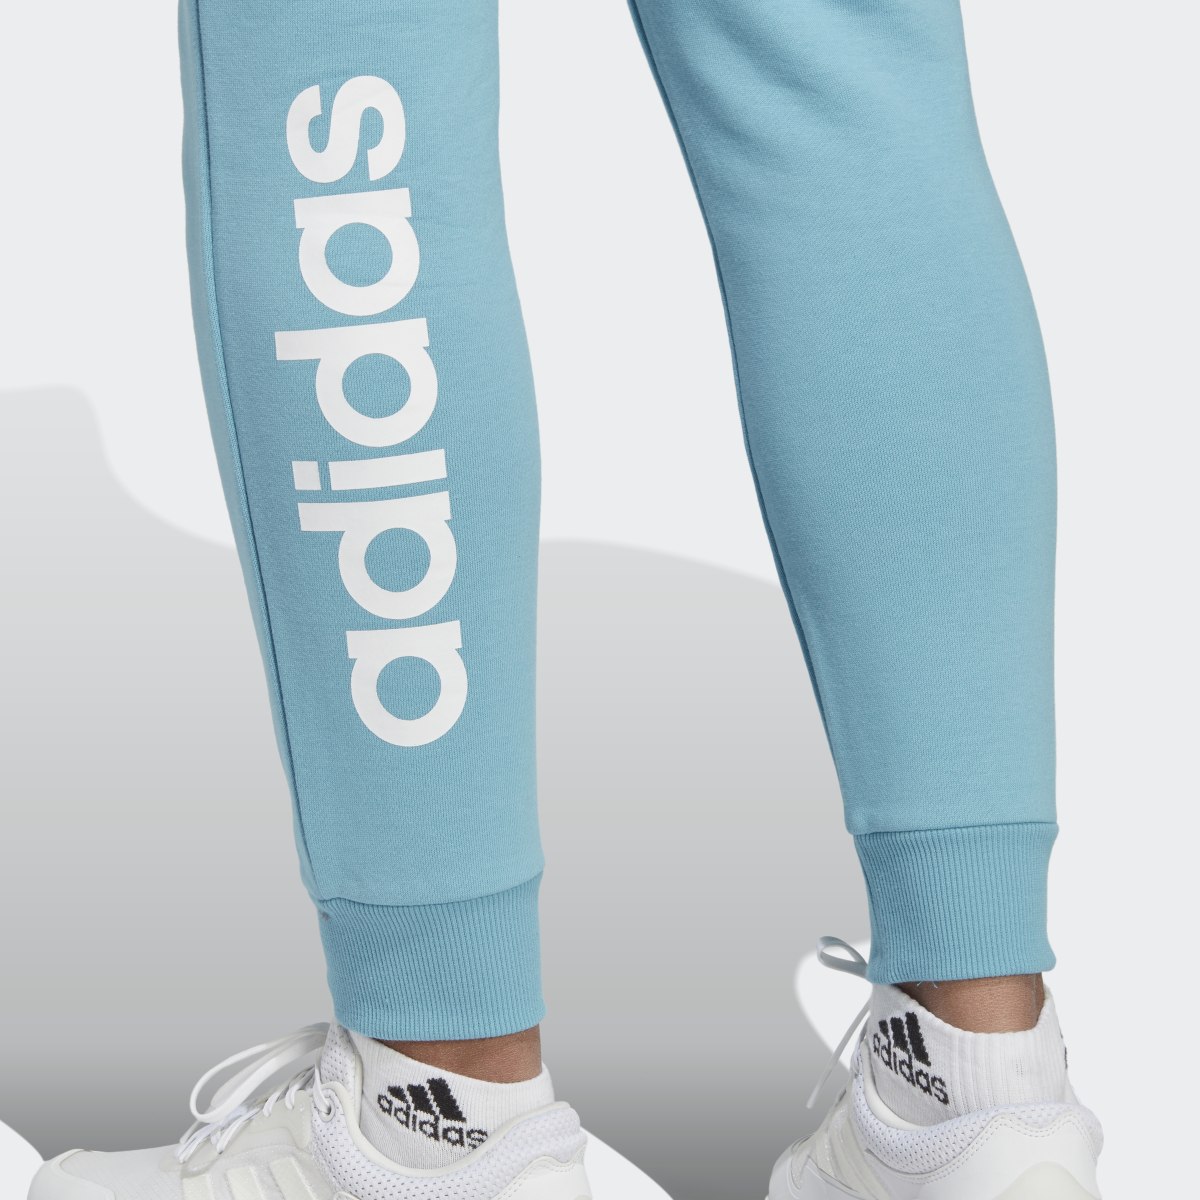 Adidas Essentials Linear French Terry Cuffed Joggers. 5